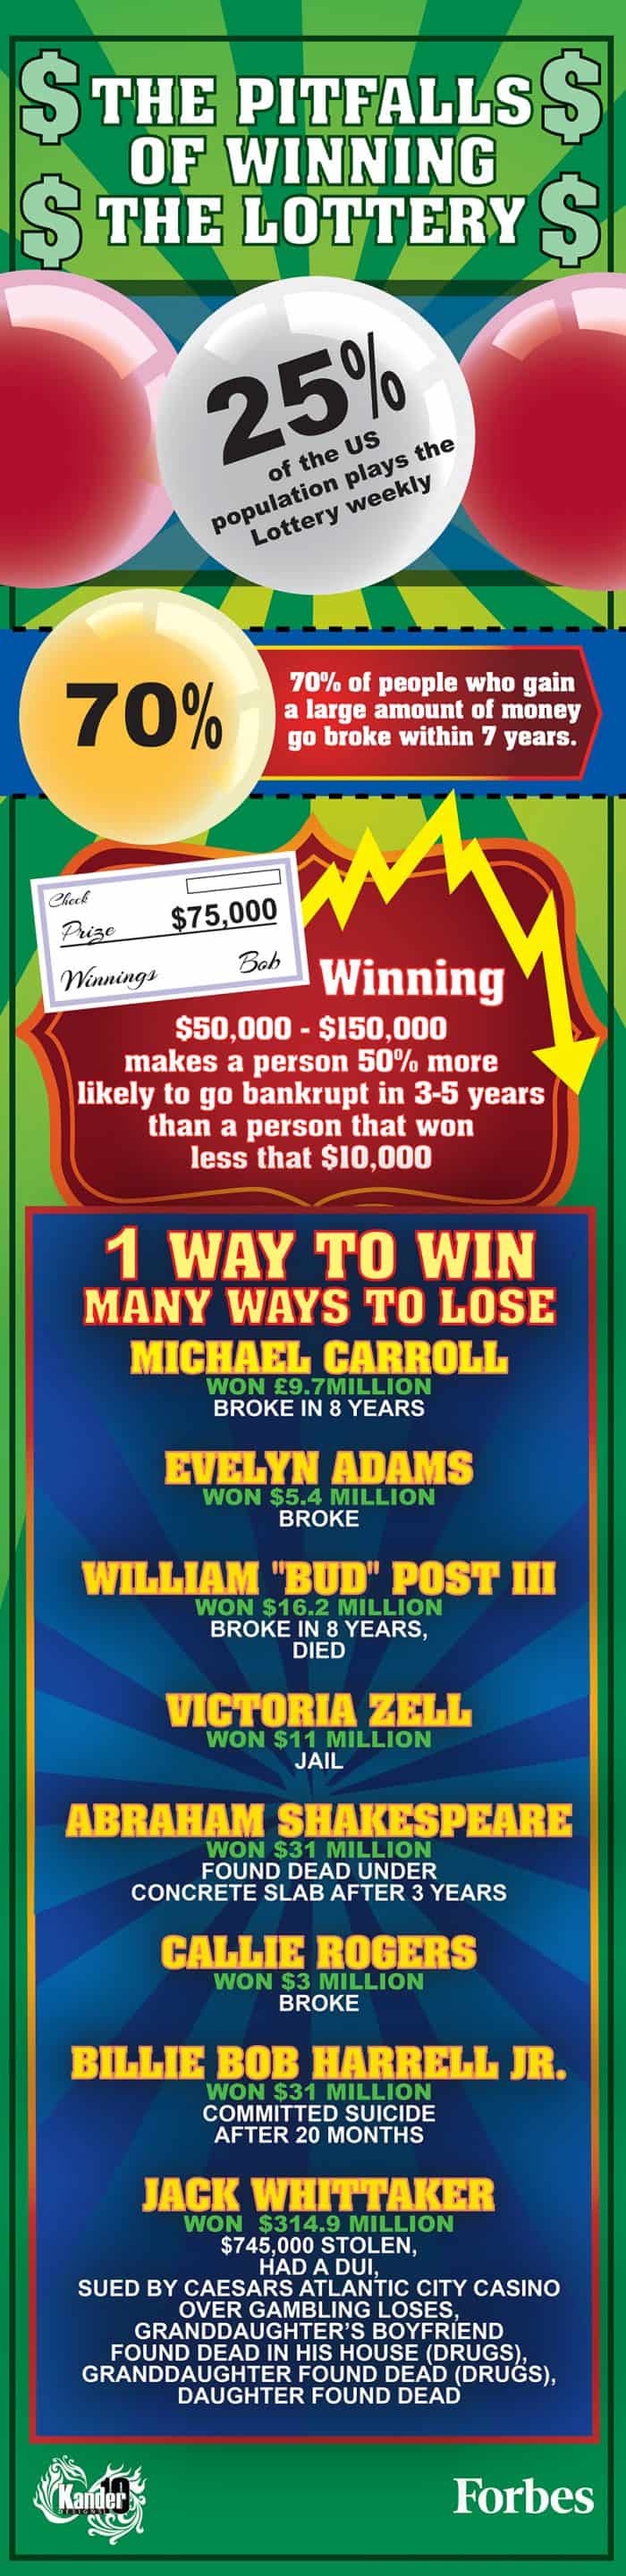 Pitfalls Of Winning The Lottery Infographic